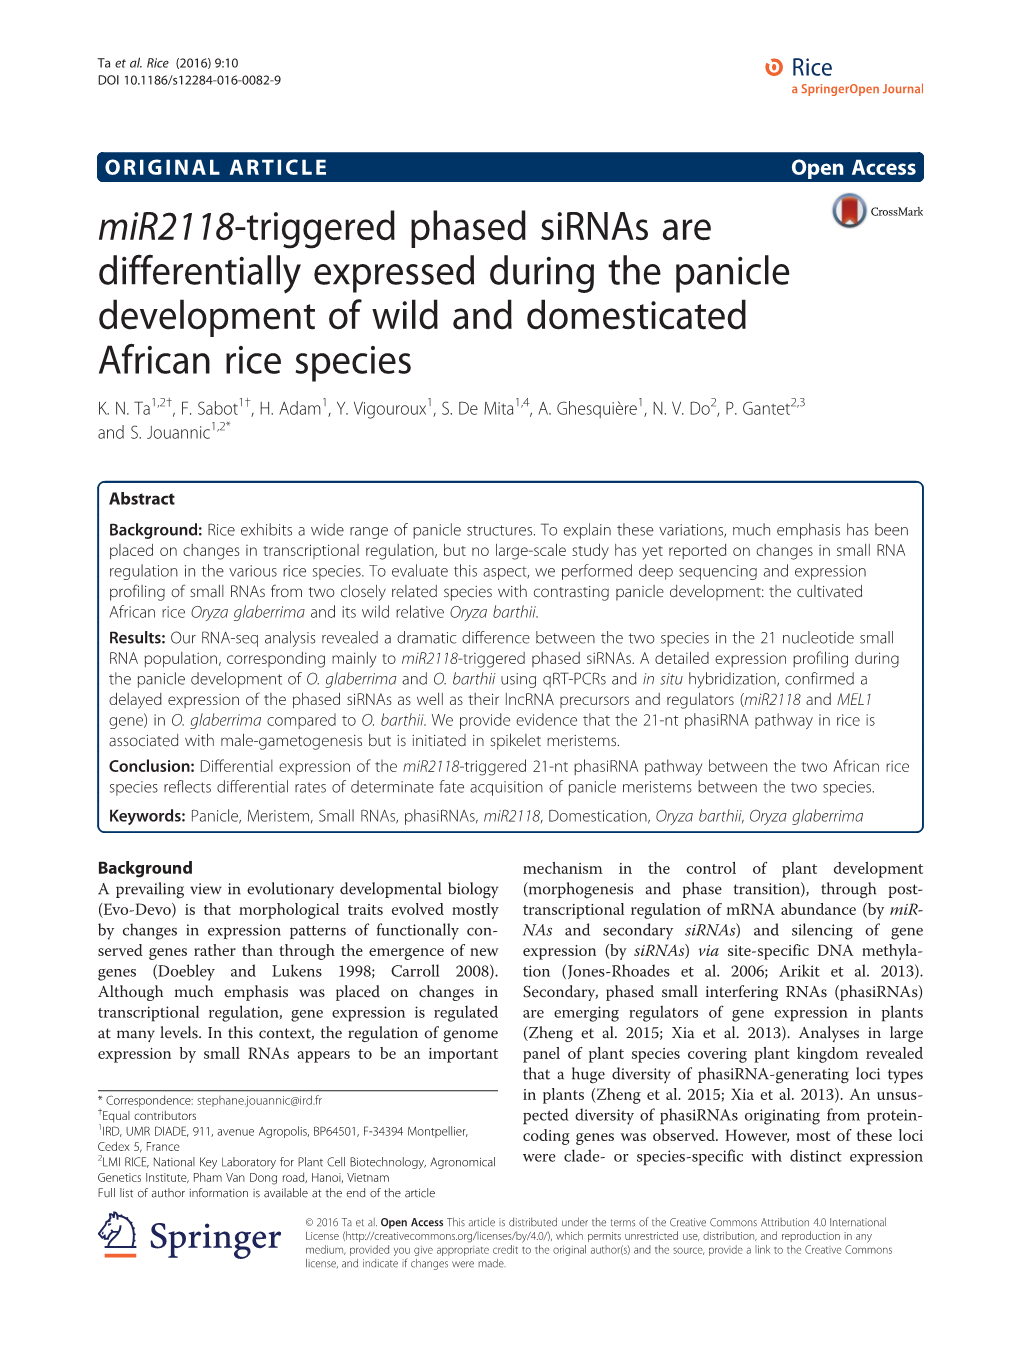 Mir2118-Triggered Phased Sirnas Are Differentially Expressed During the Panicle Development of Wild and Domesticated African Rice Species K